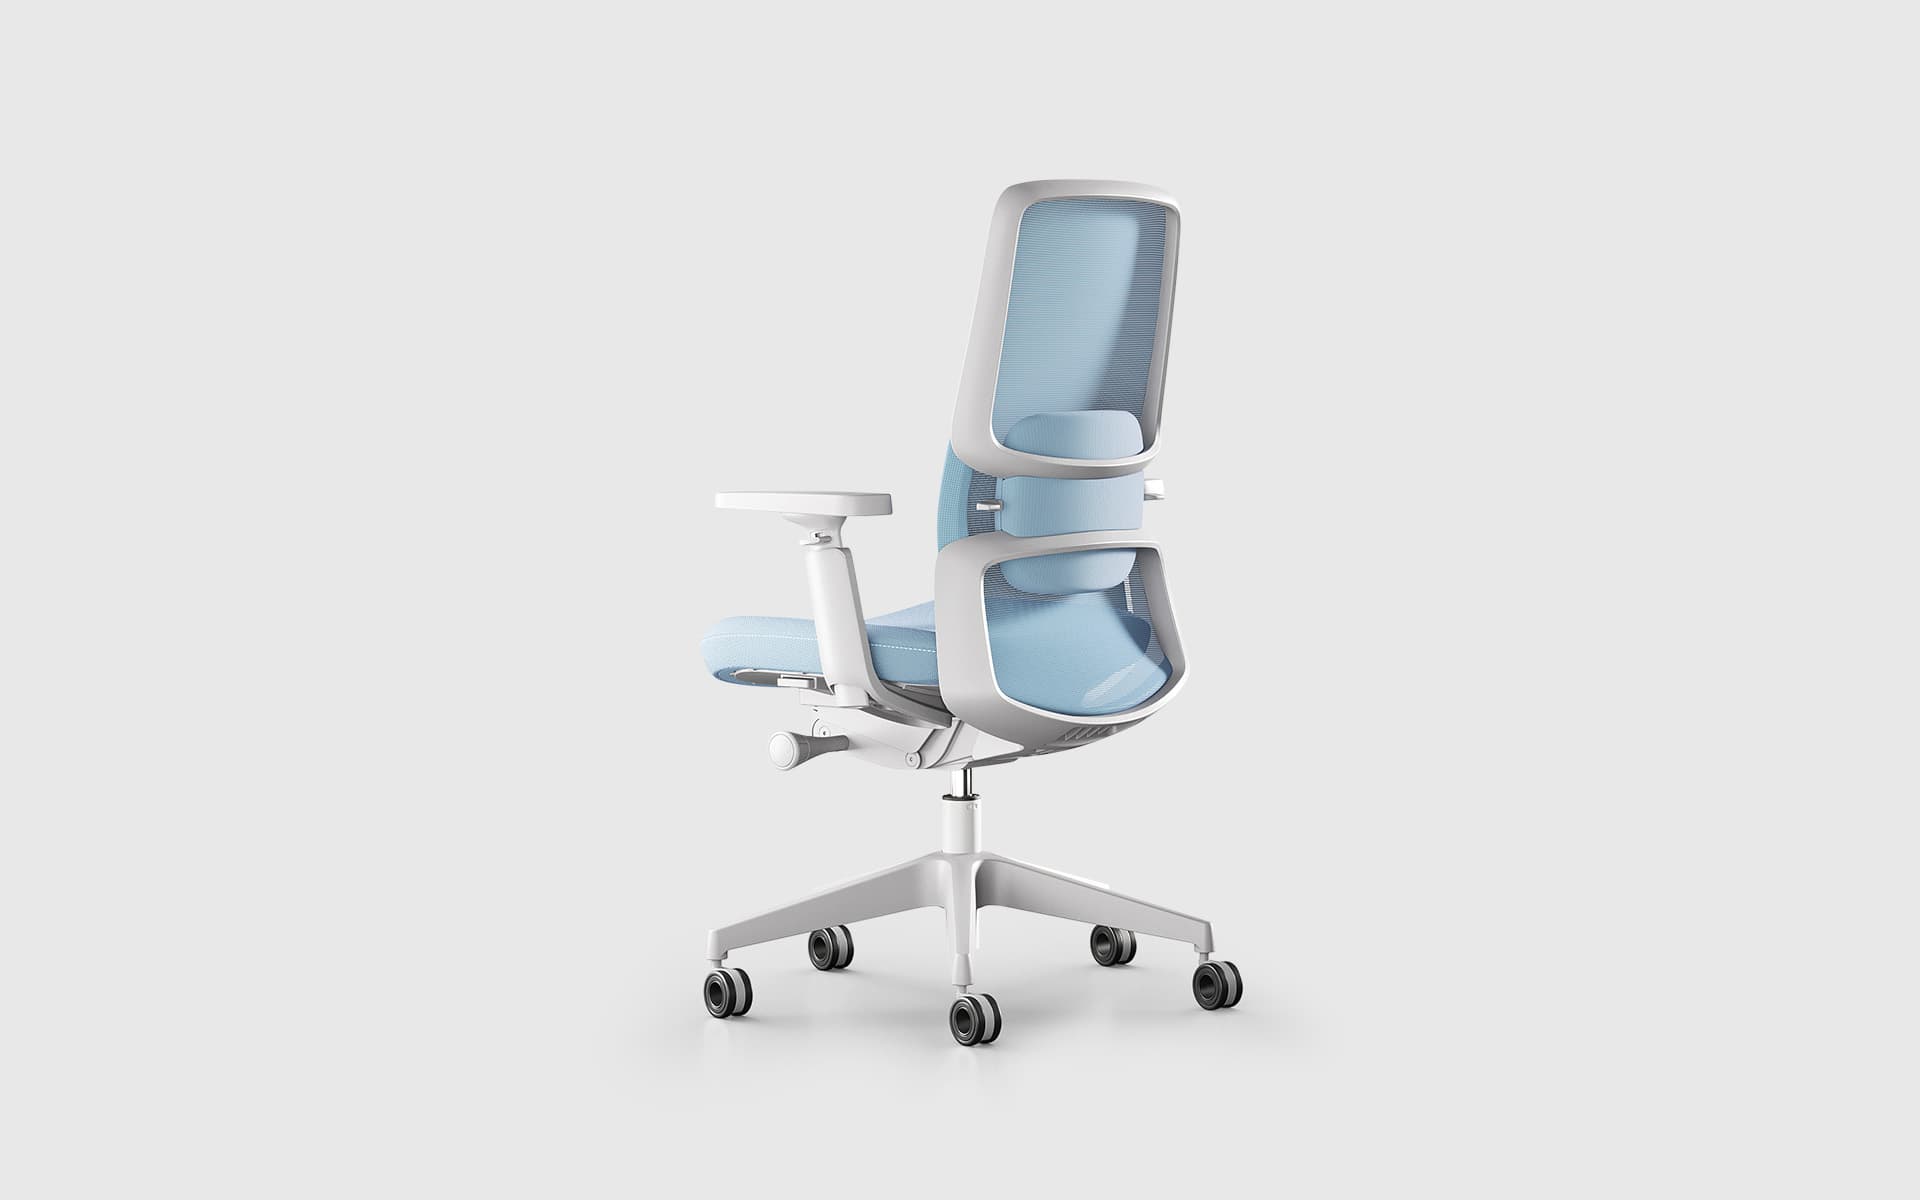 M2 office chair by ITO Design for Henglin in white and light blue